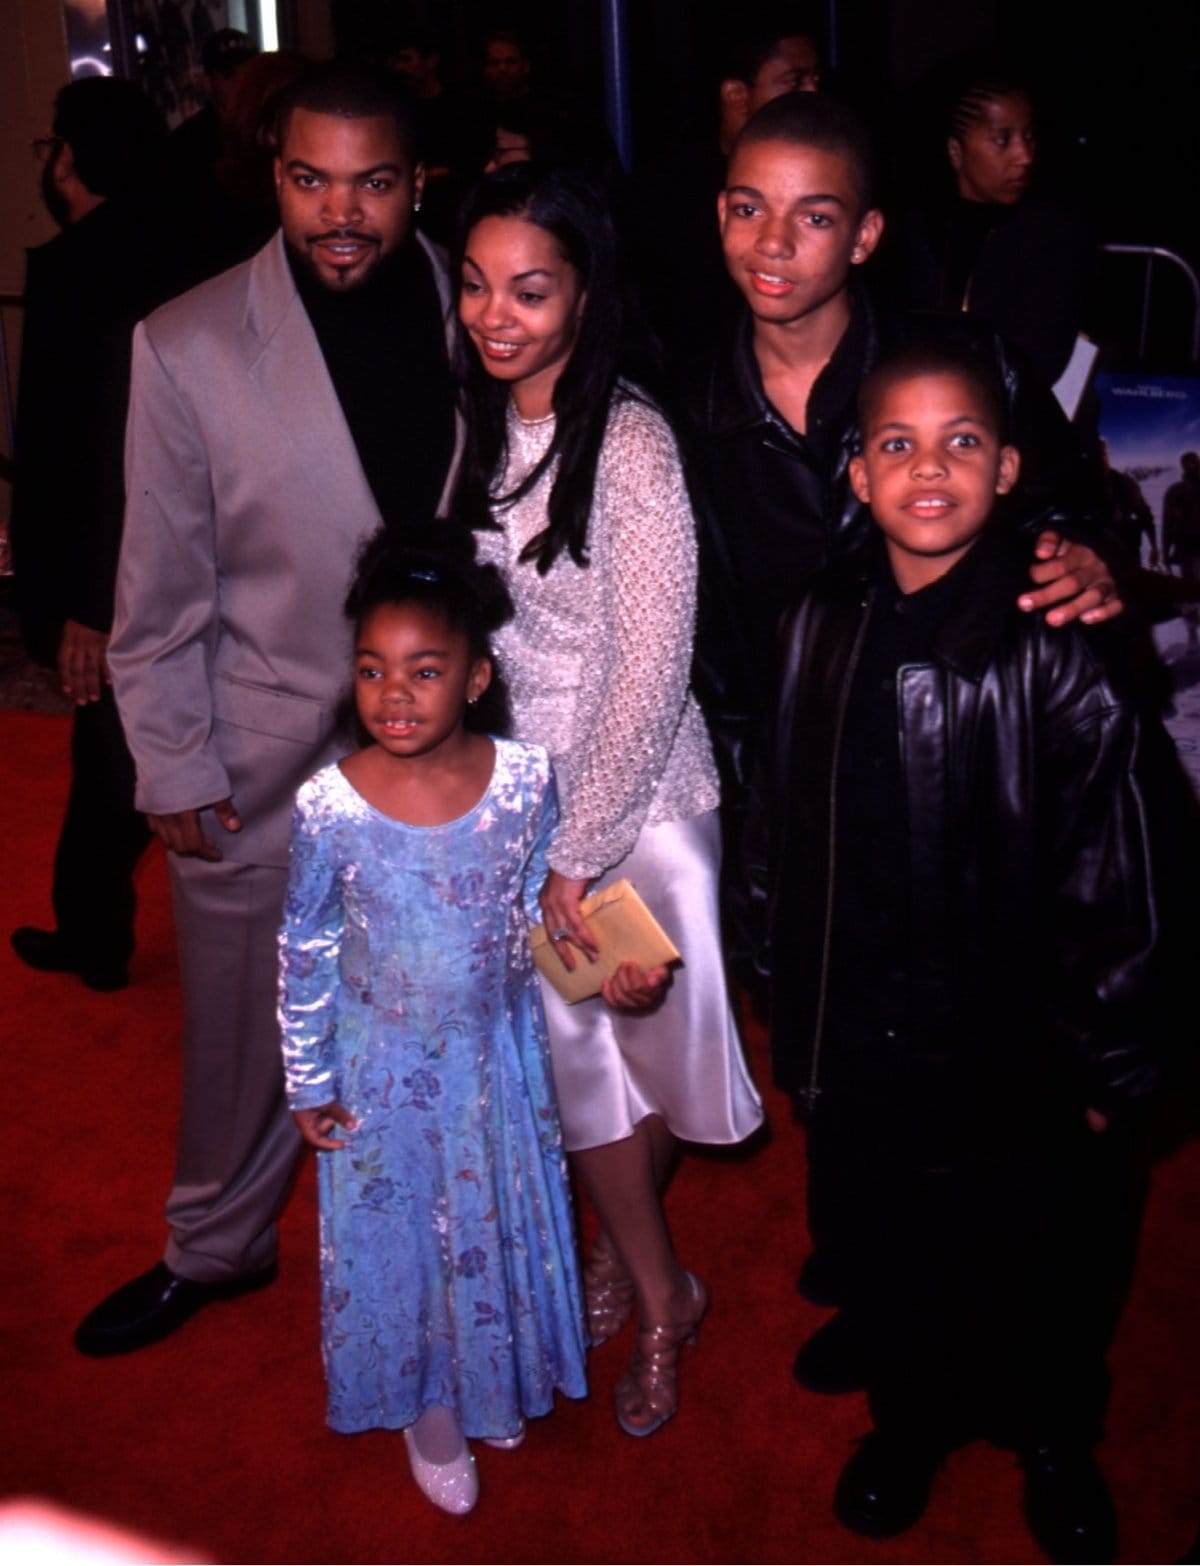 Ice Cube and his wife Kimberly Woodruff with three of their children at the premiere of The Three Kings